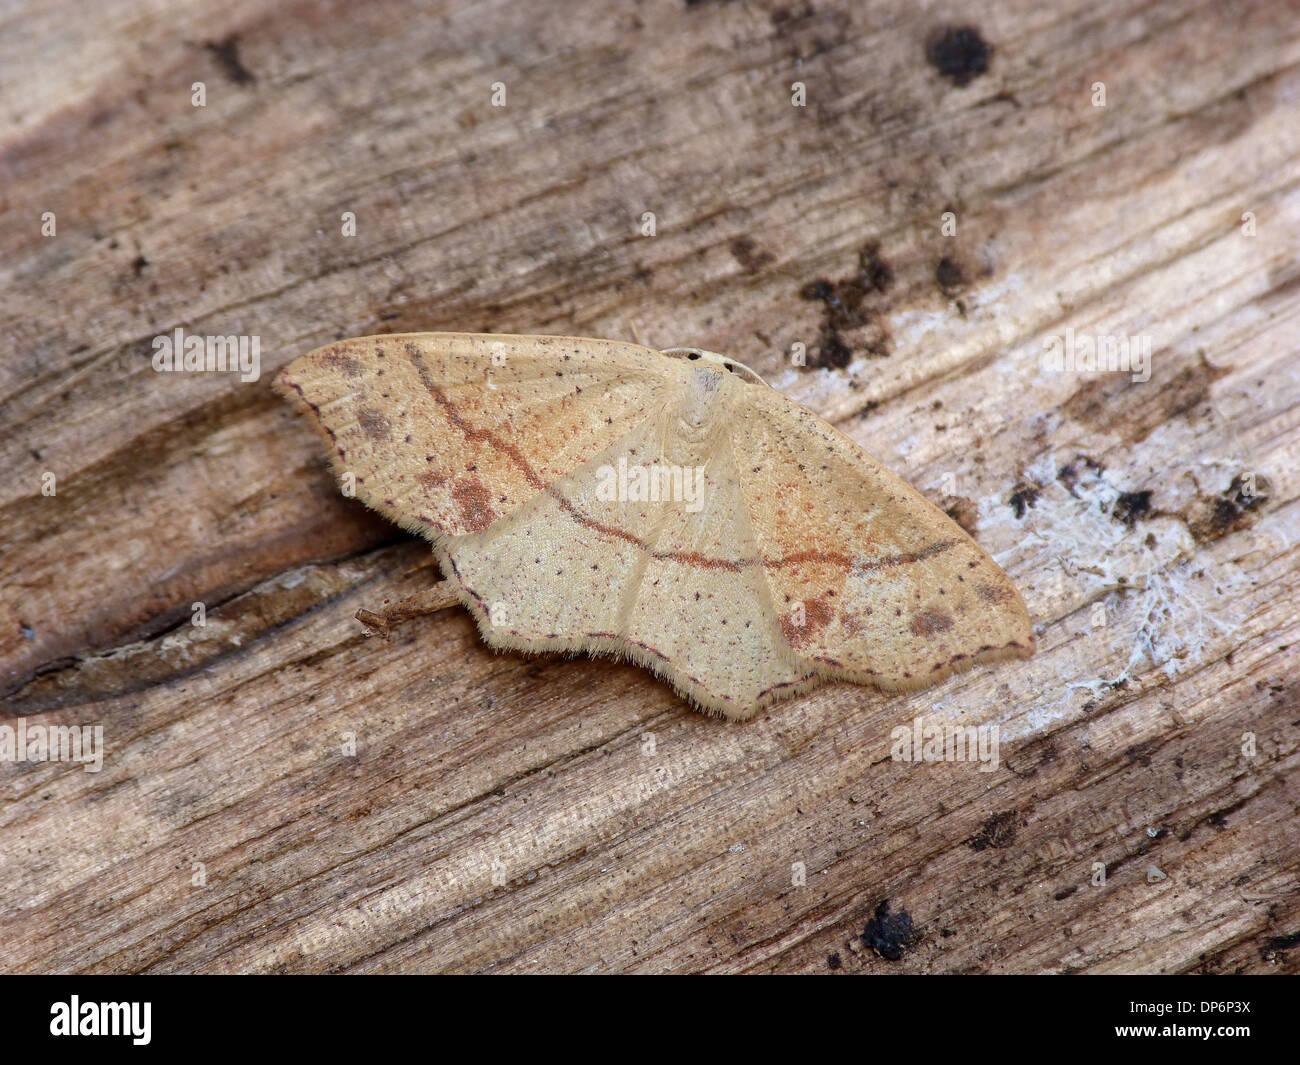 Maiden's Blush (Cyclophora punctaria) adult male, resting on log, Cannobina Valley, Italian Alps, Piedmont, Italy, July Stock Photo